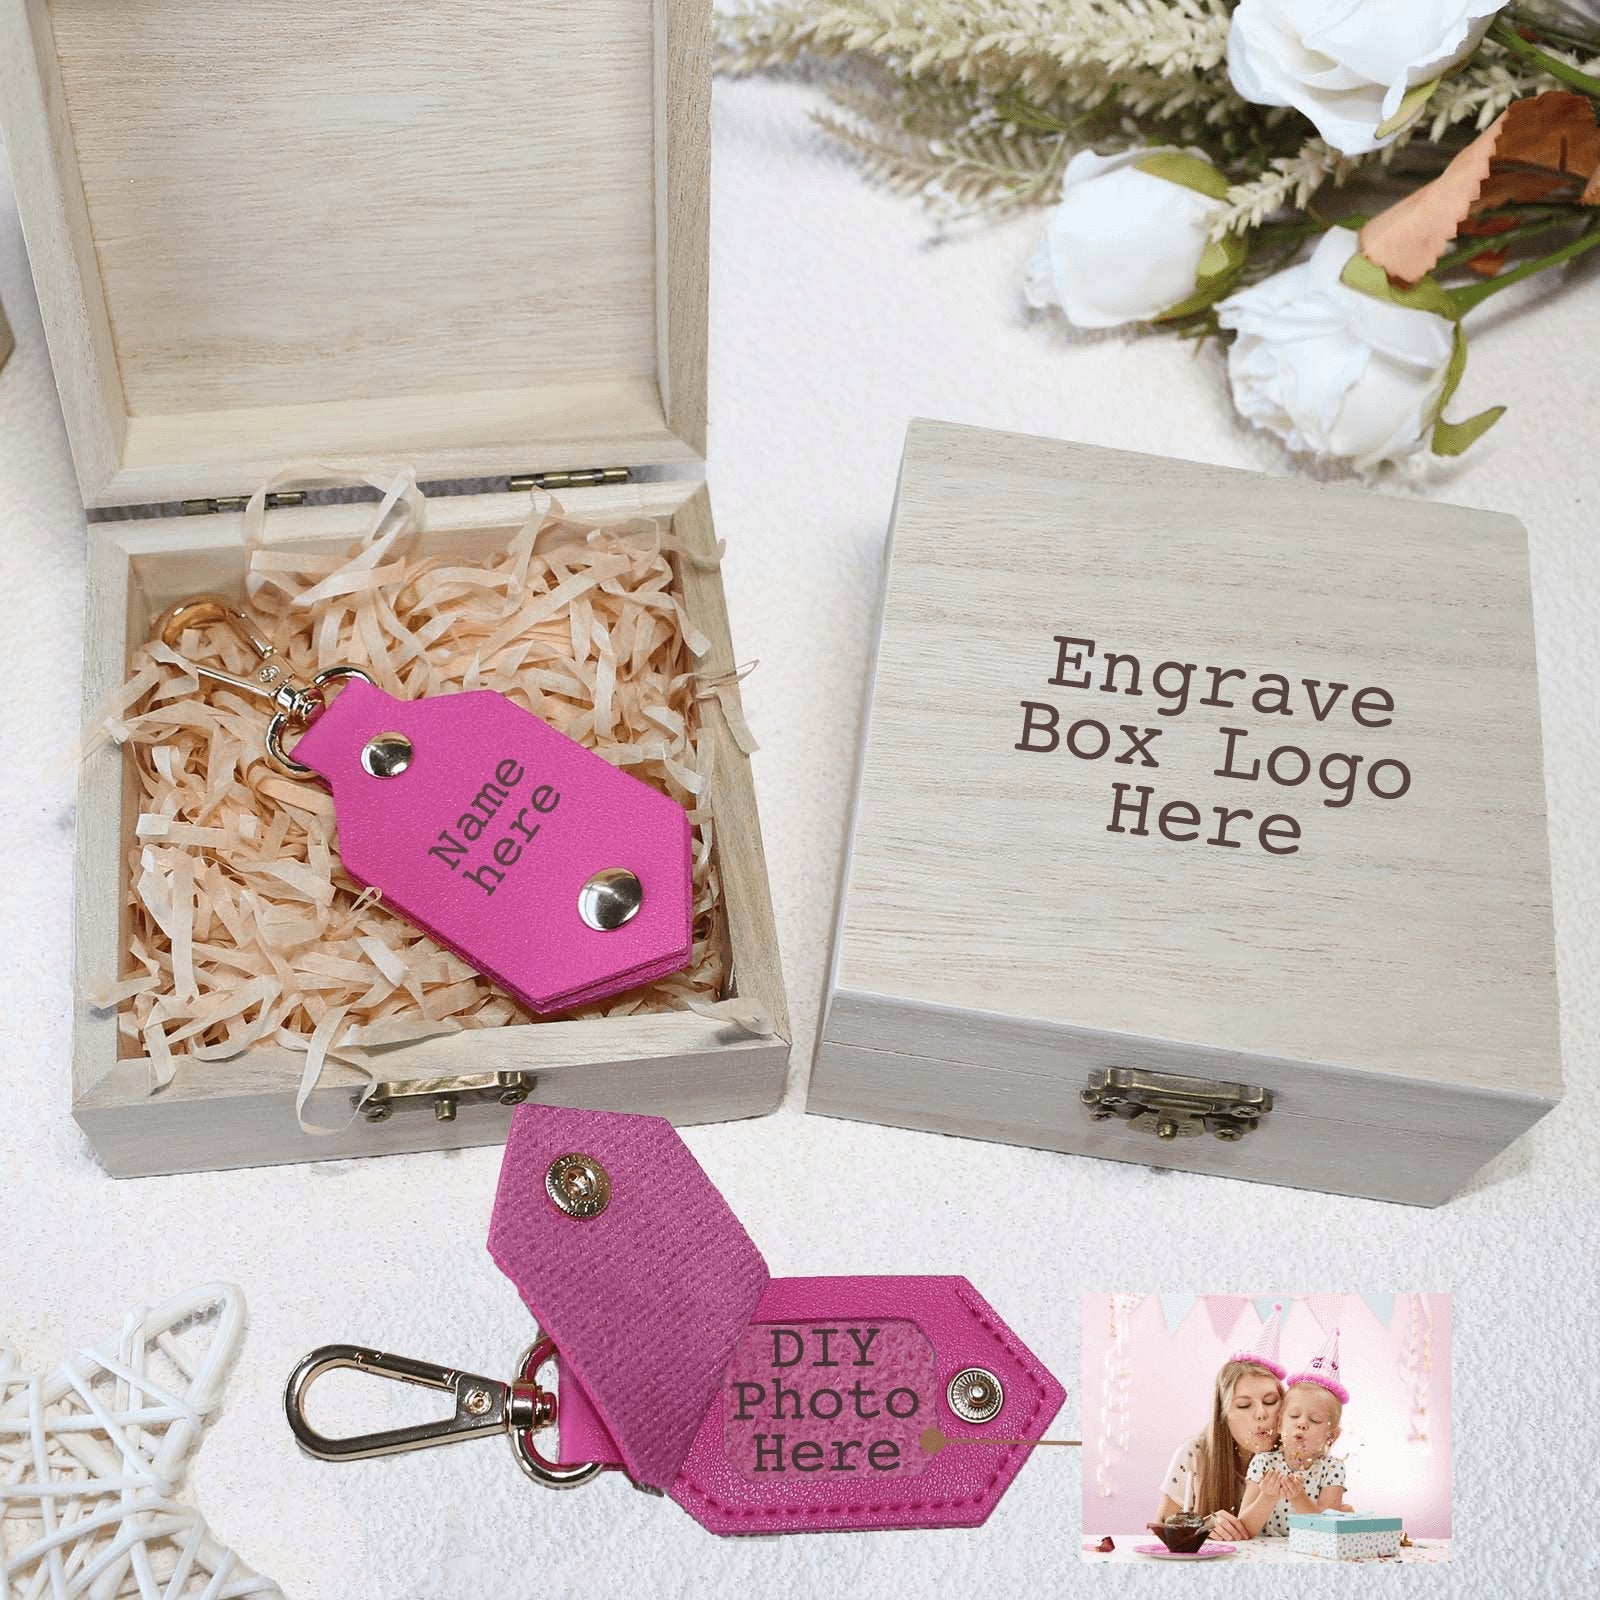 Personalized Picture Key Chains, Funny Leather Photo Keychains, Custom Keychain With Picture, Llaveros Personalizados Customized Keychain Gifts For Women Boyfriend Husband Mens - uniqicon